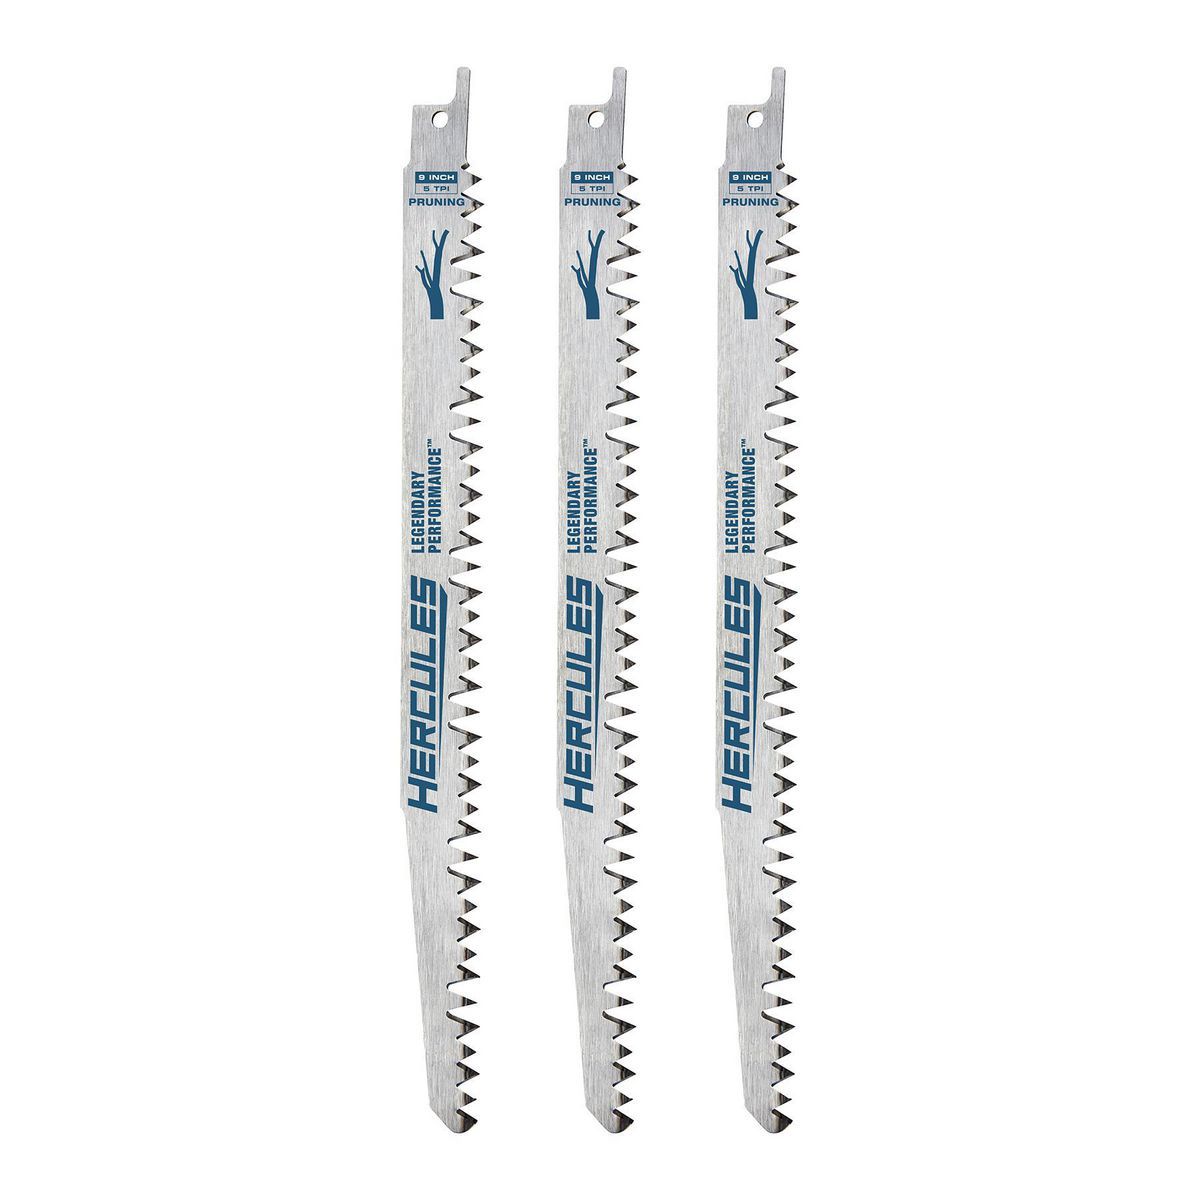 9 in.  5 TPI Reciprocating Saw Pruning Blades, 3 Pk.